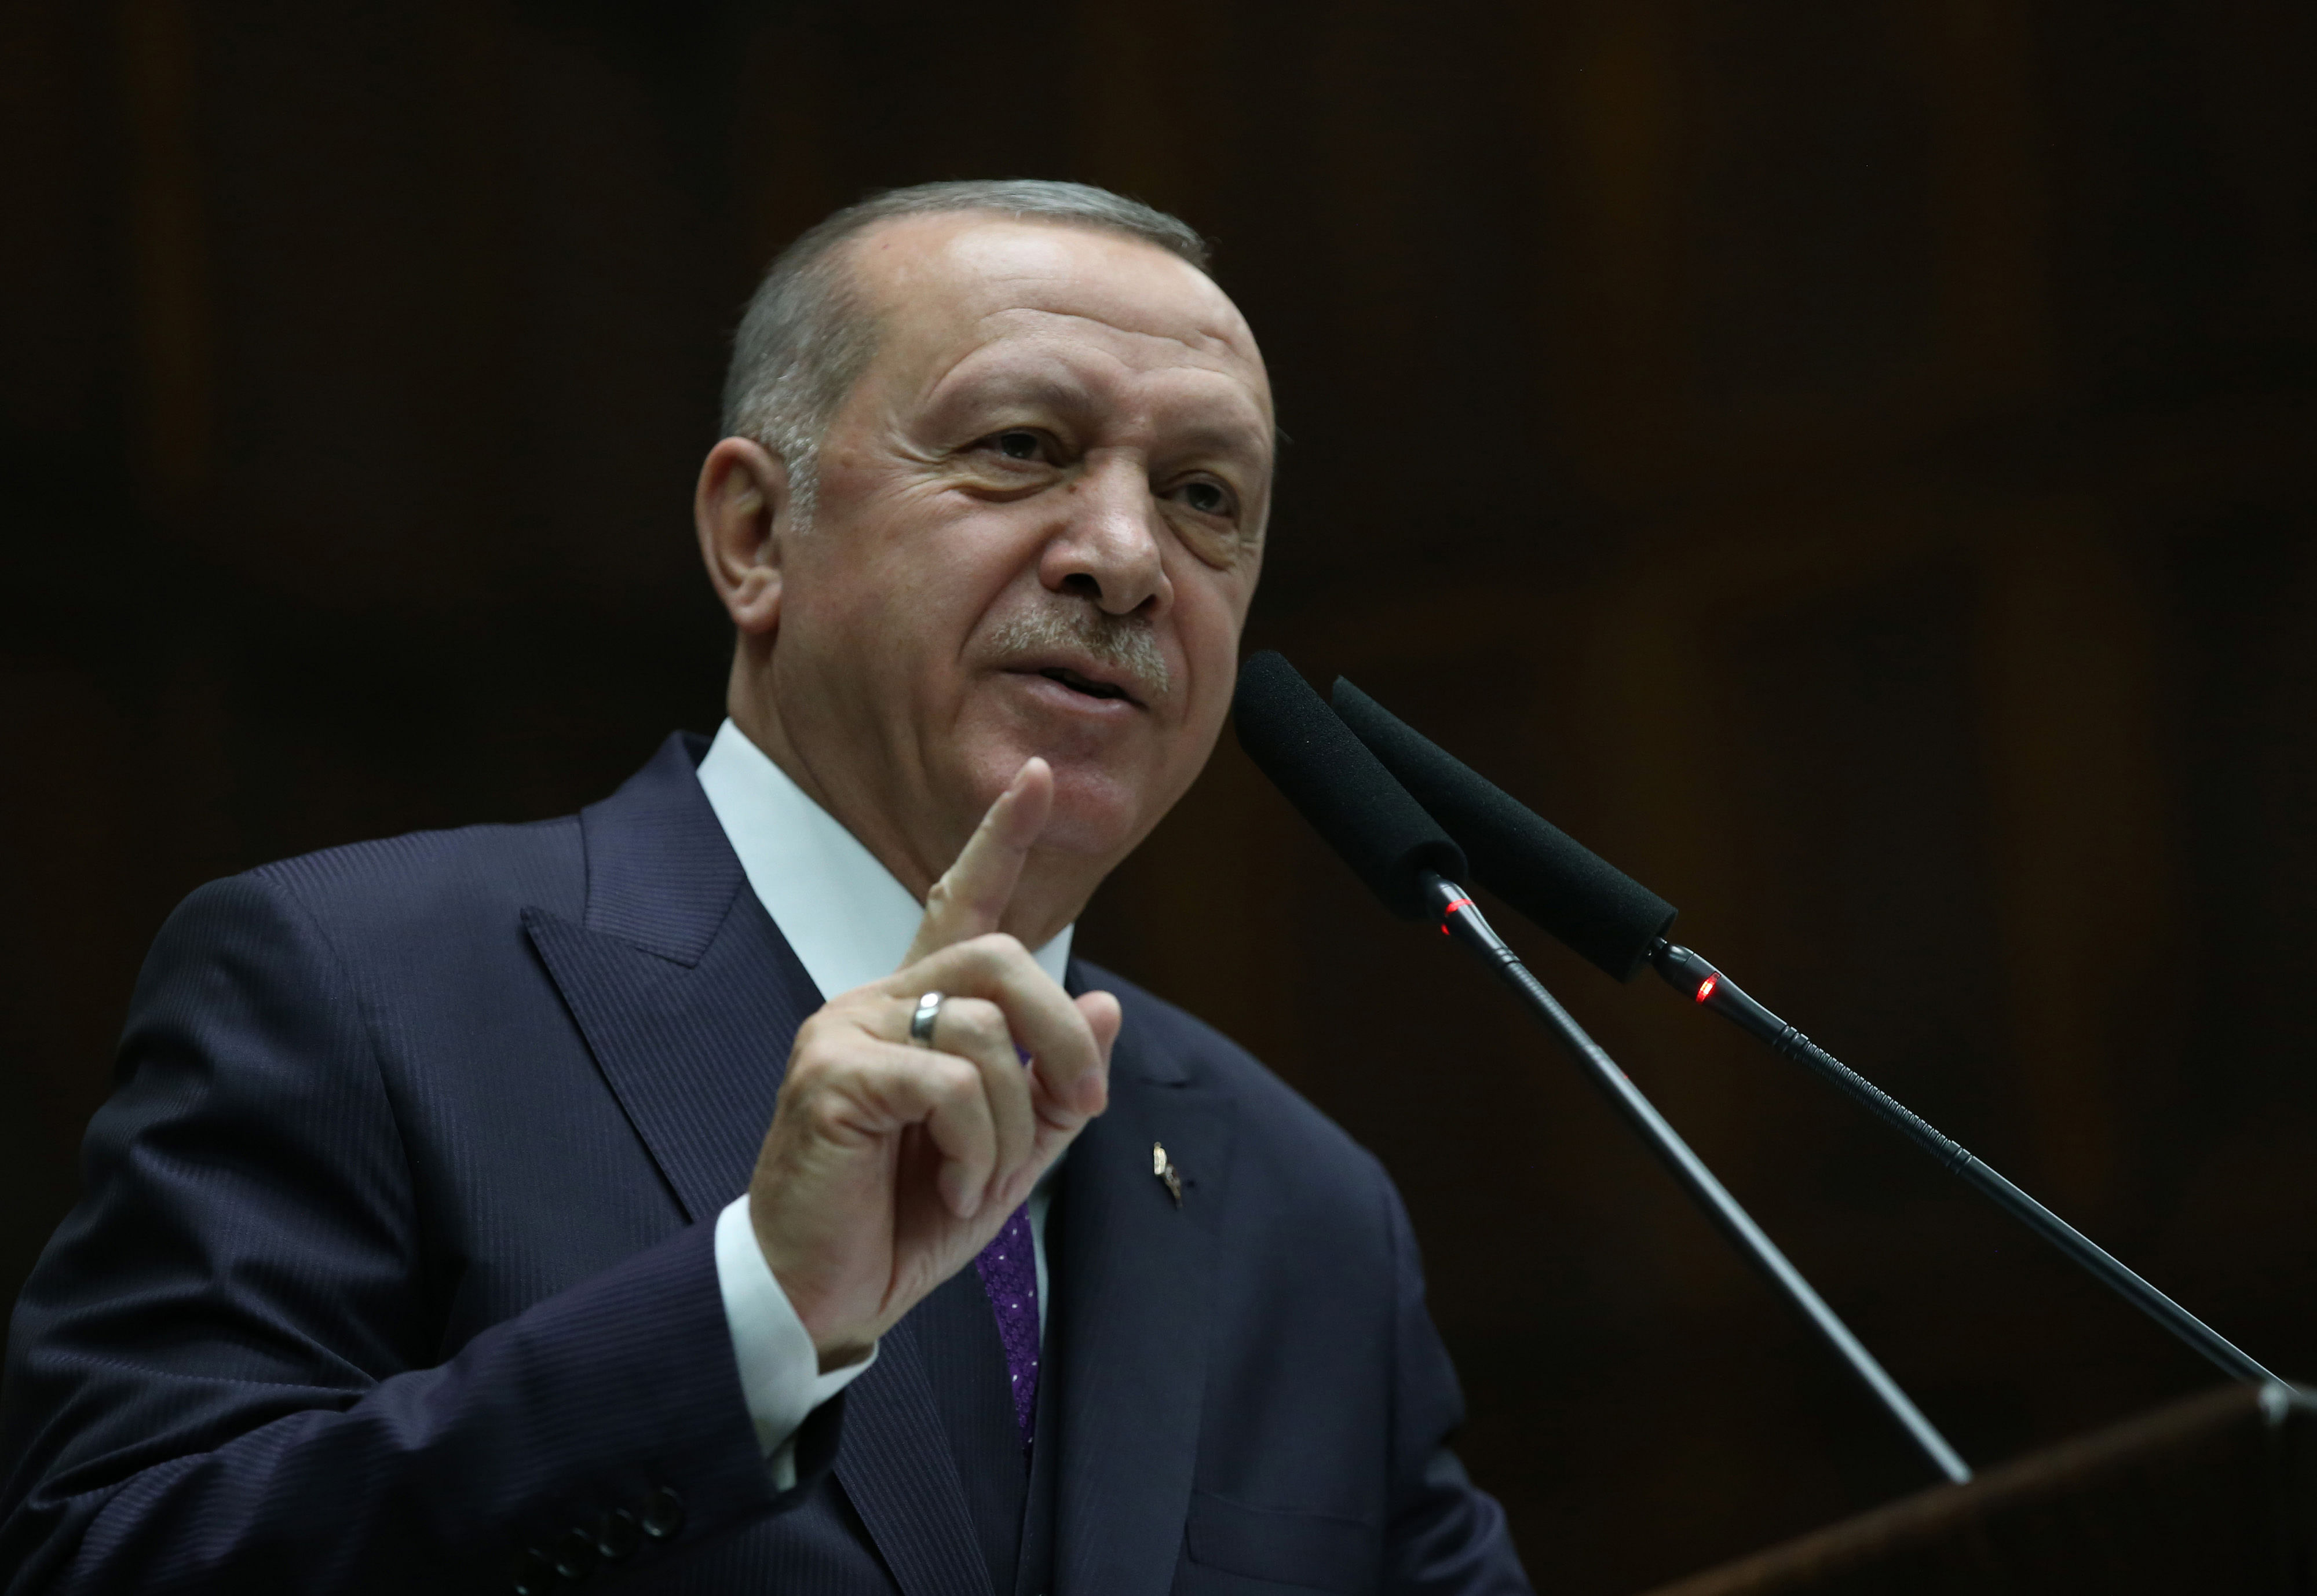 President of Turkey and leader of Justice and Development (AK) Party Recep Tayyip Erdogan. (AFP Photo)